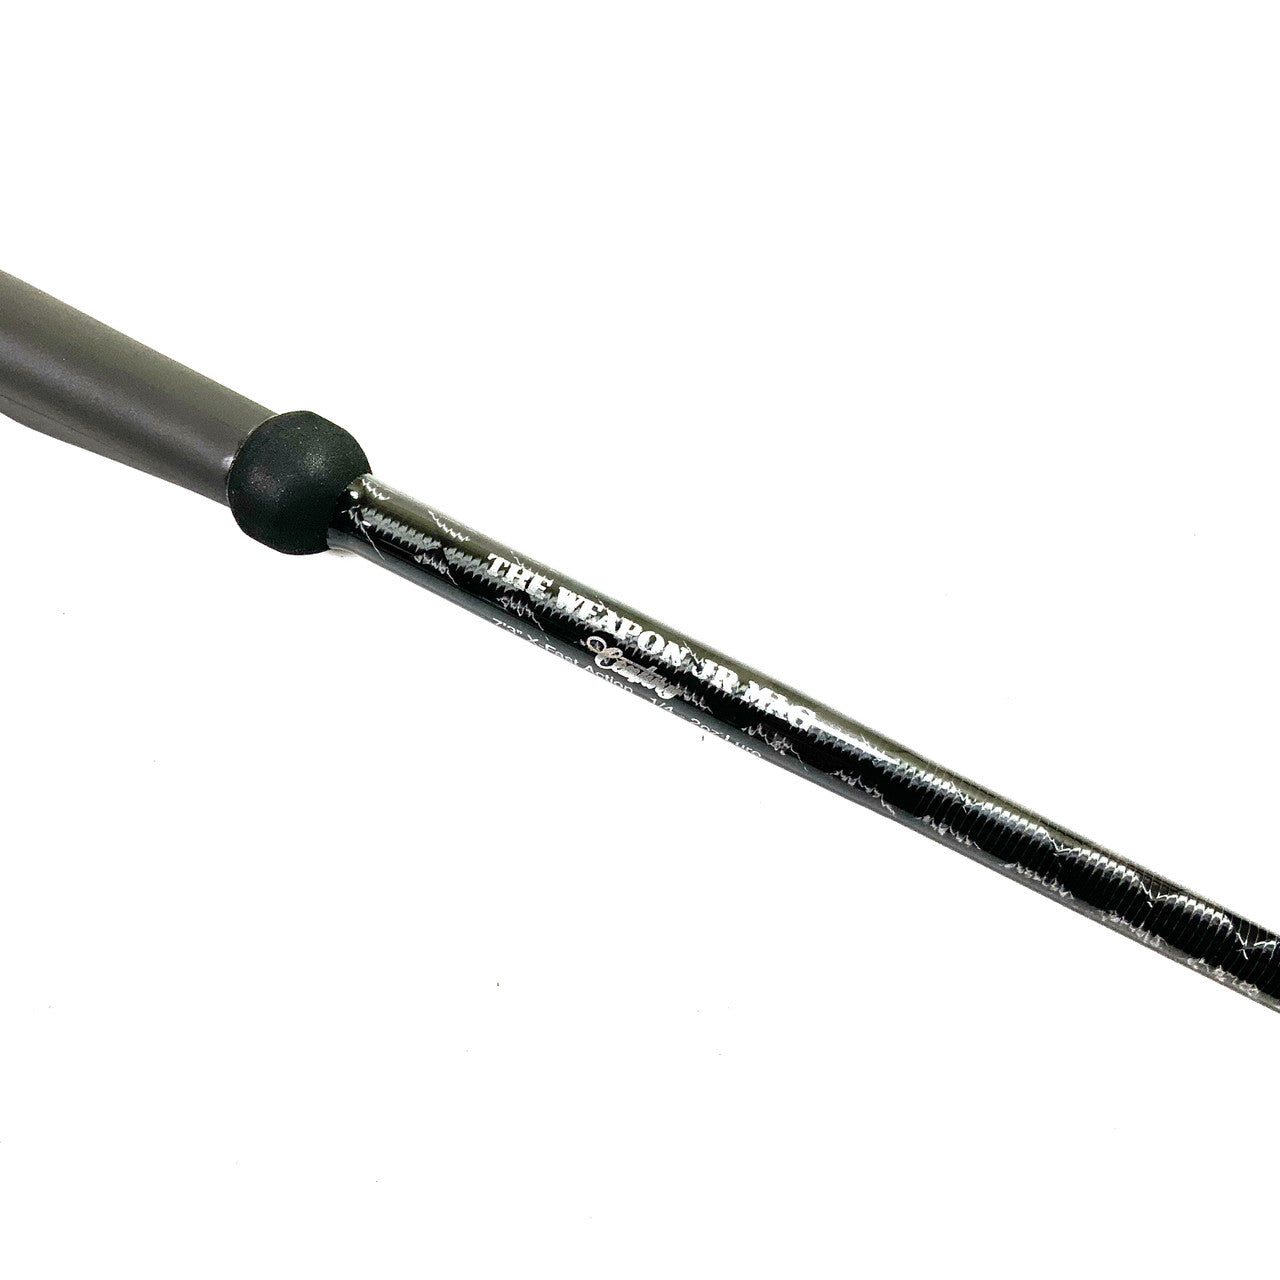 Century Rods The Weapon Jr Mag Spinning Rod 7'10" 1pc, 1/4-3oz, Up to 30# ISS945XSS MAG